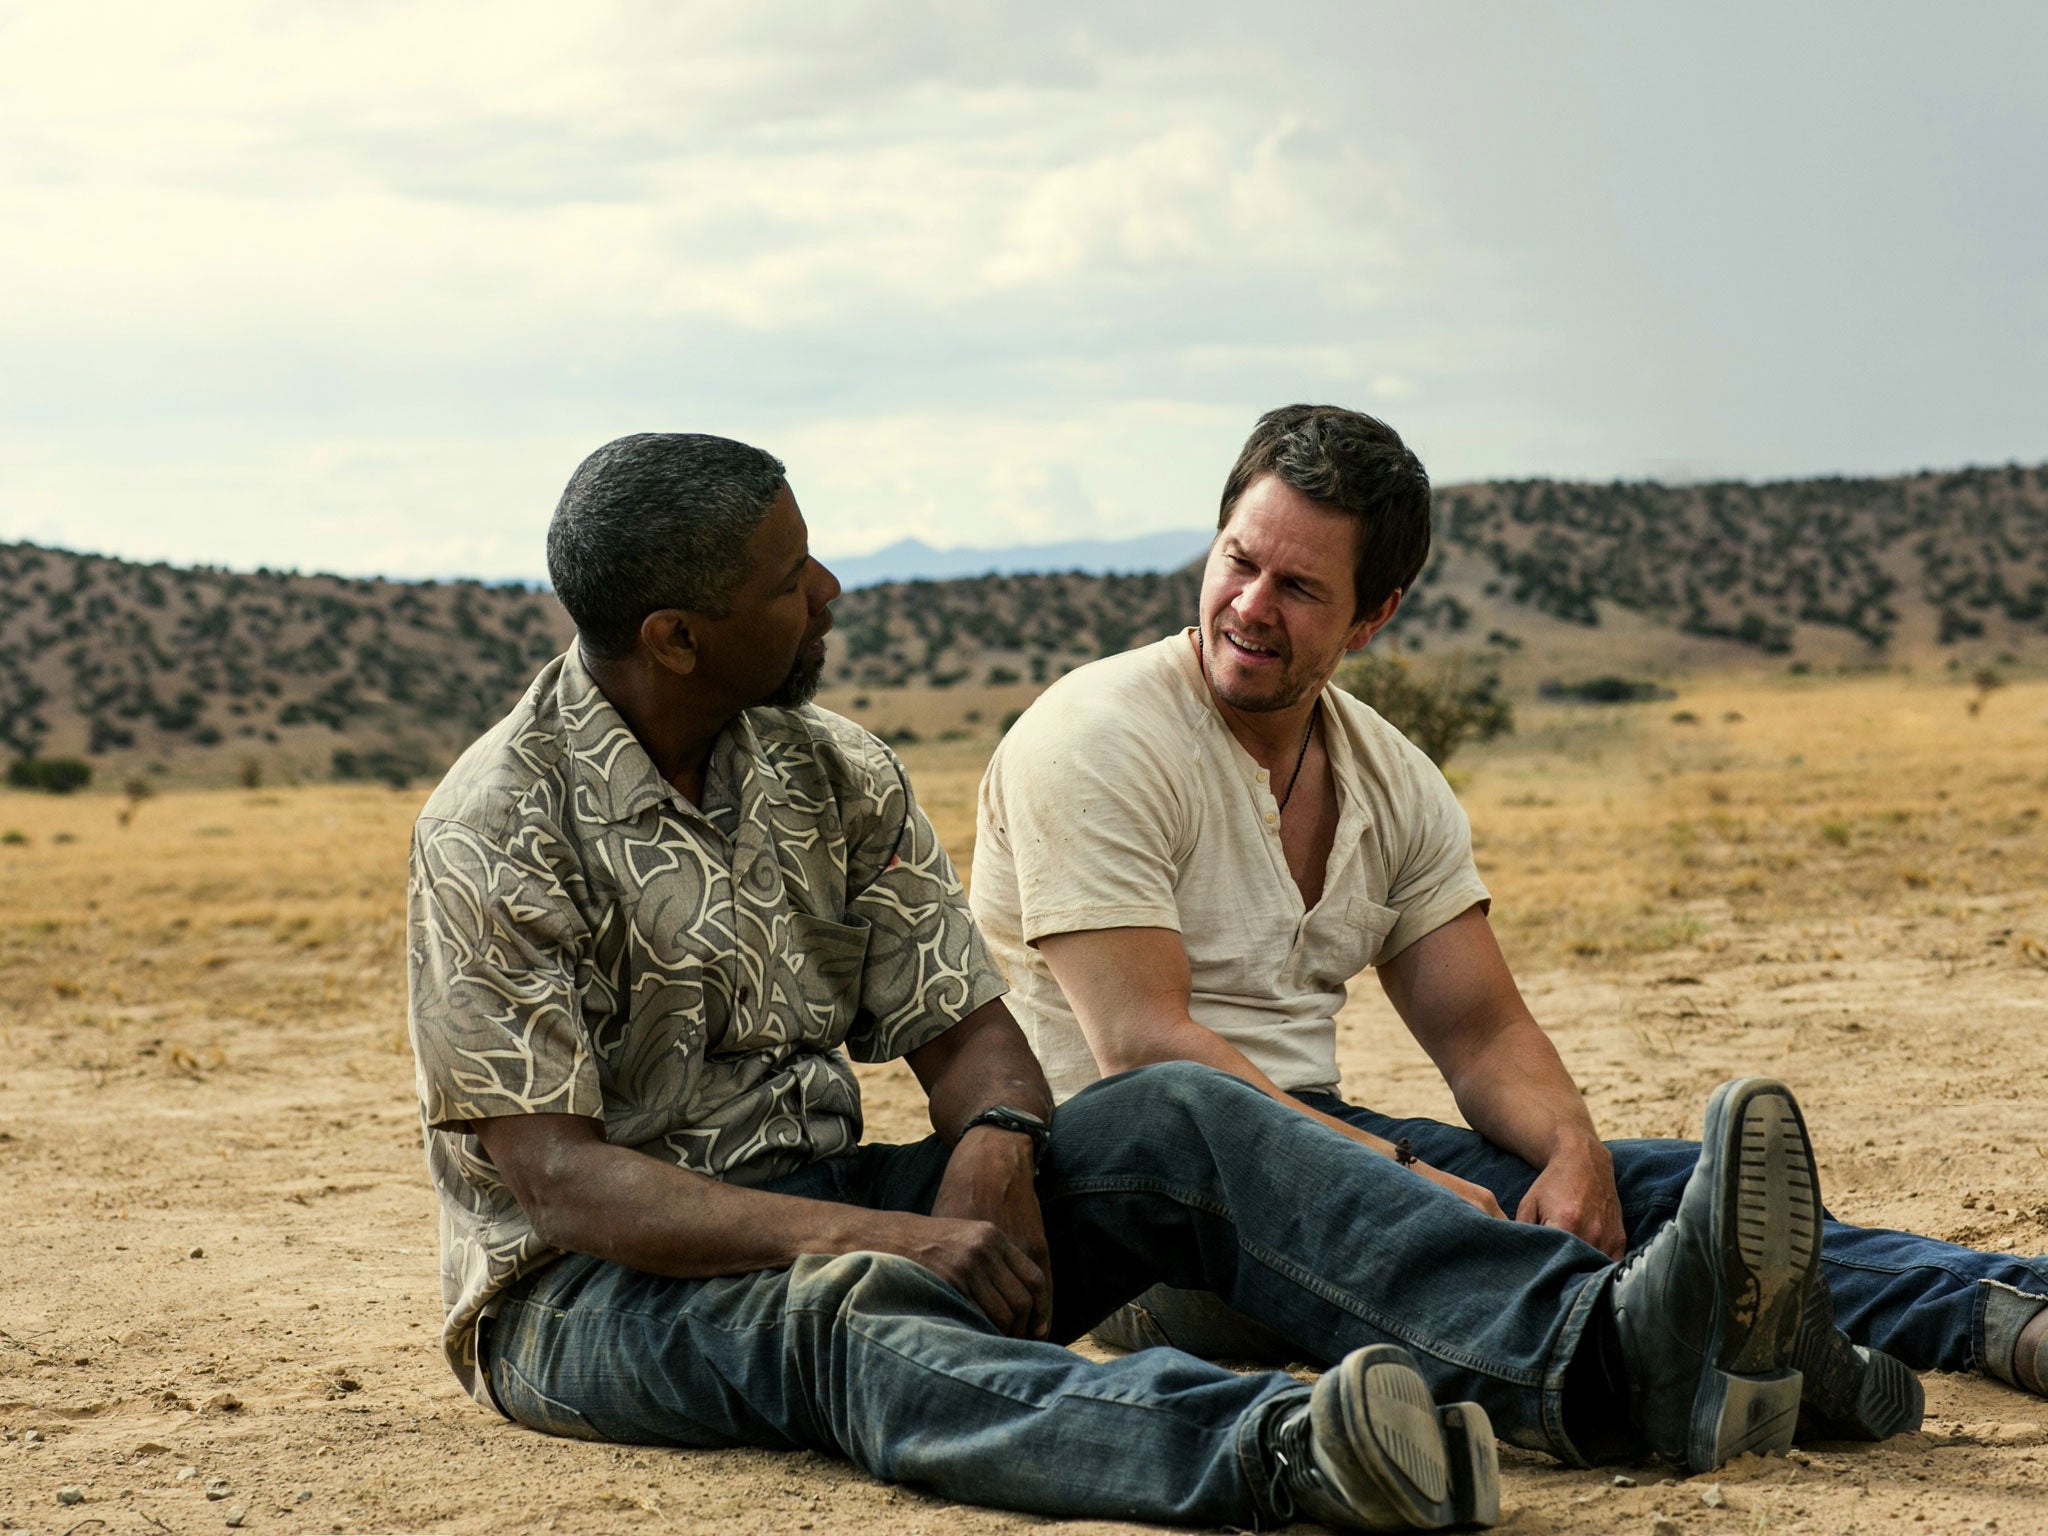 Out of gas: Denzel Washington and Mark Wahlberg fail to load up on
laughs in '2 Guns'